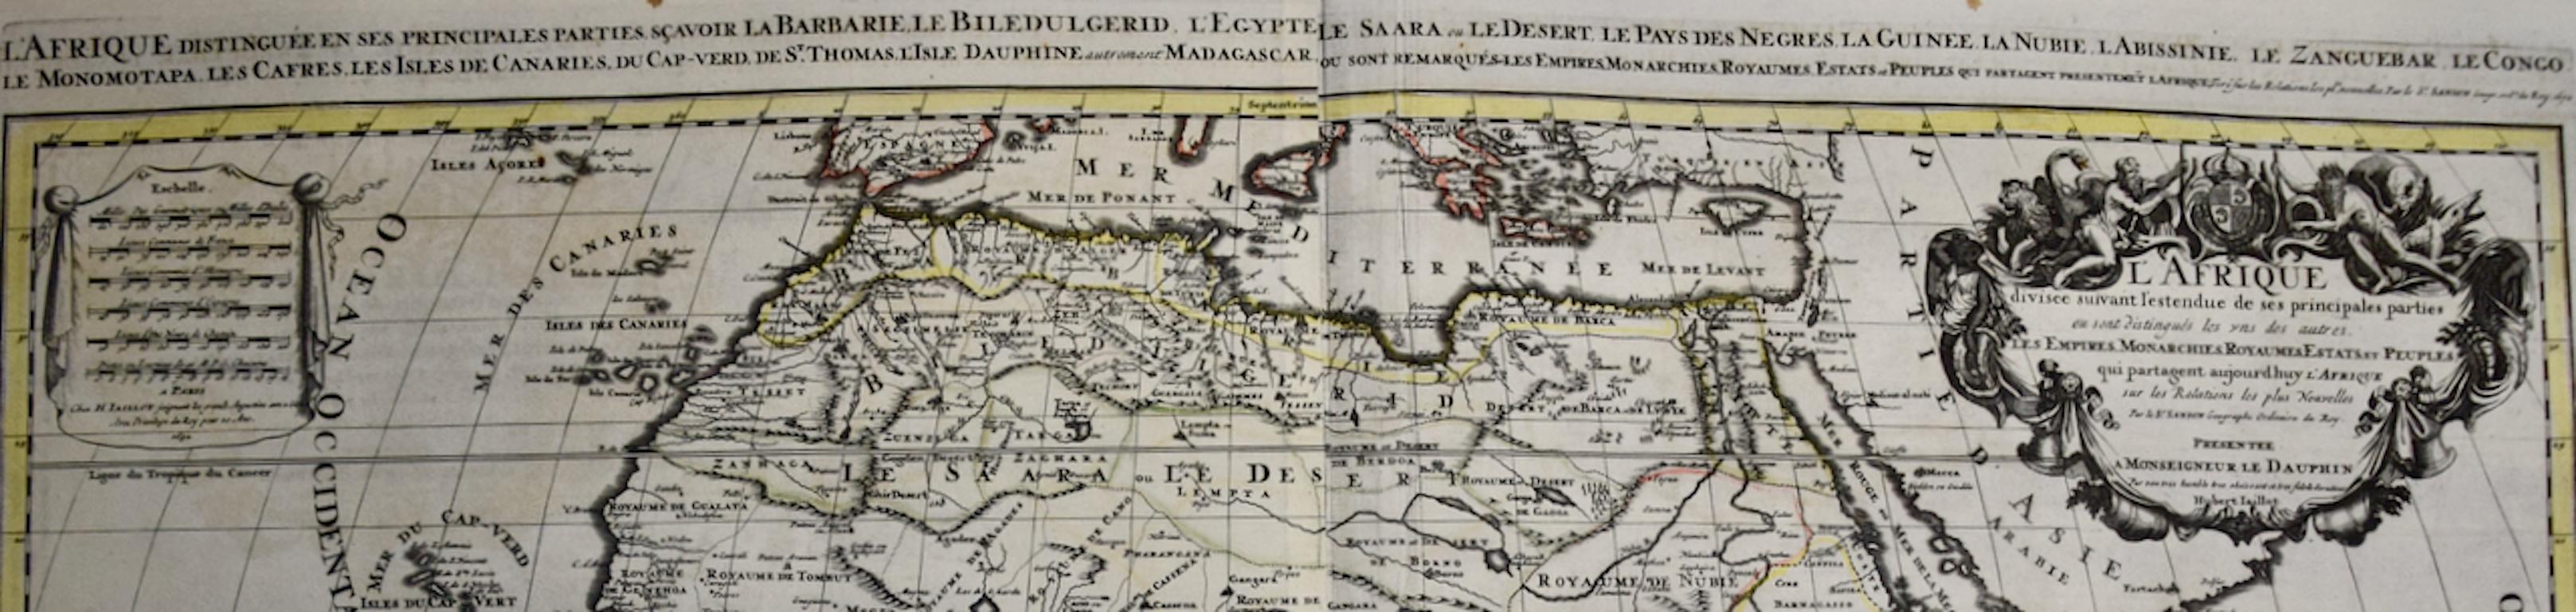 This large original hand-colored copperplate engraved map of Africa entitled 